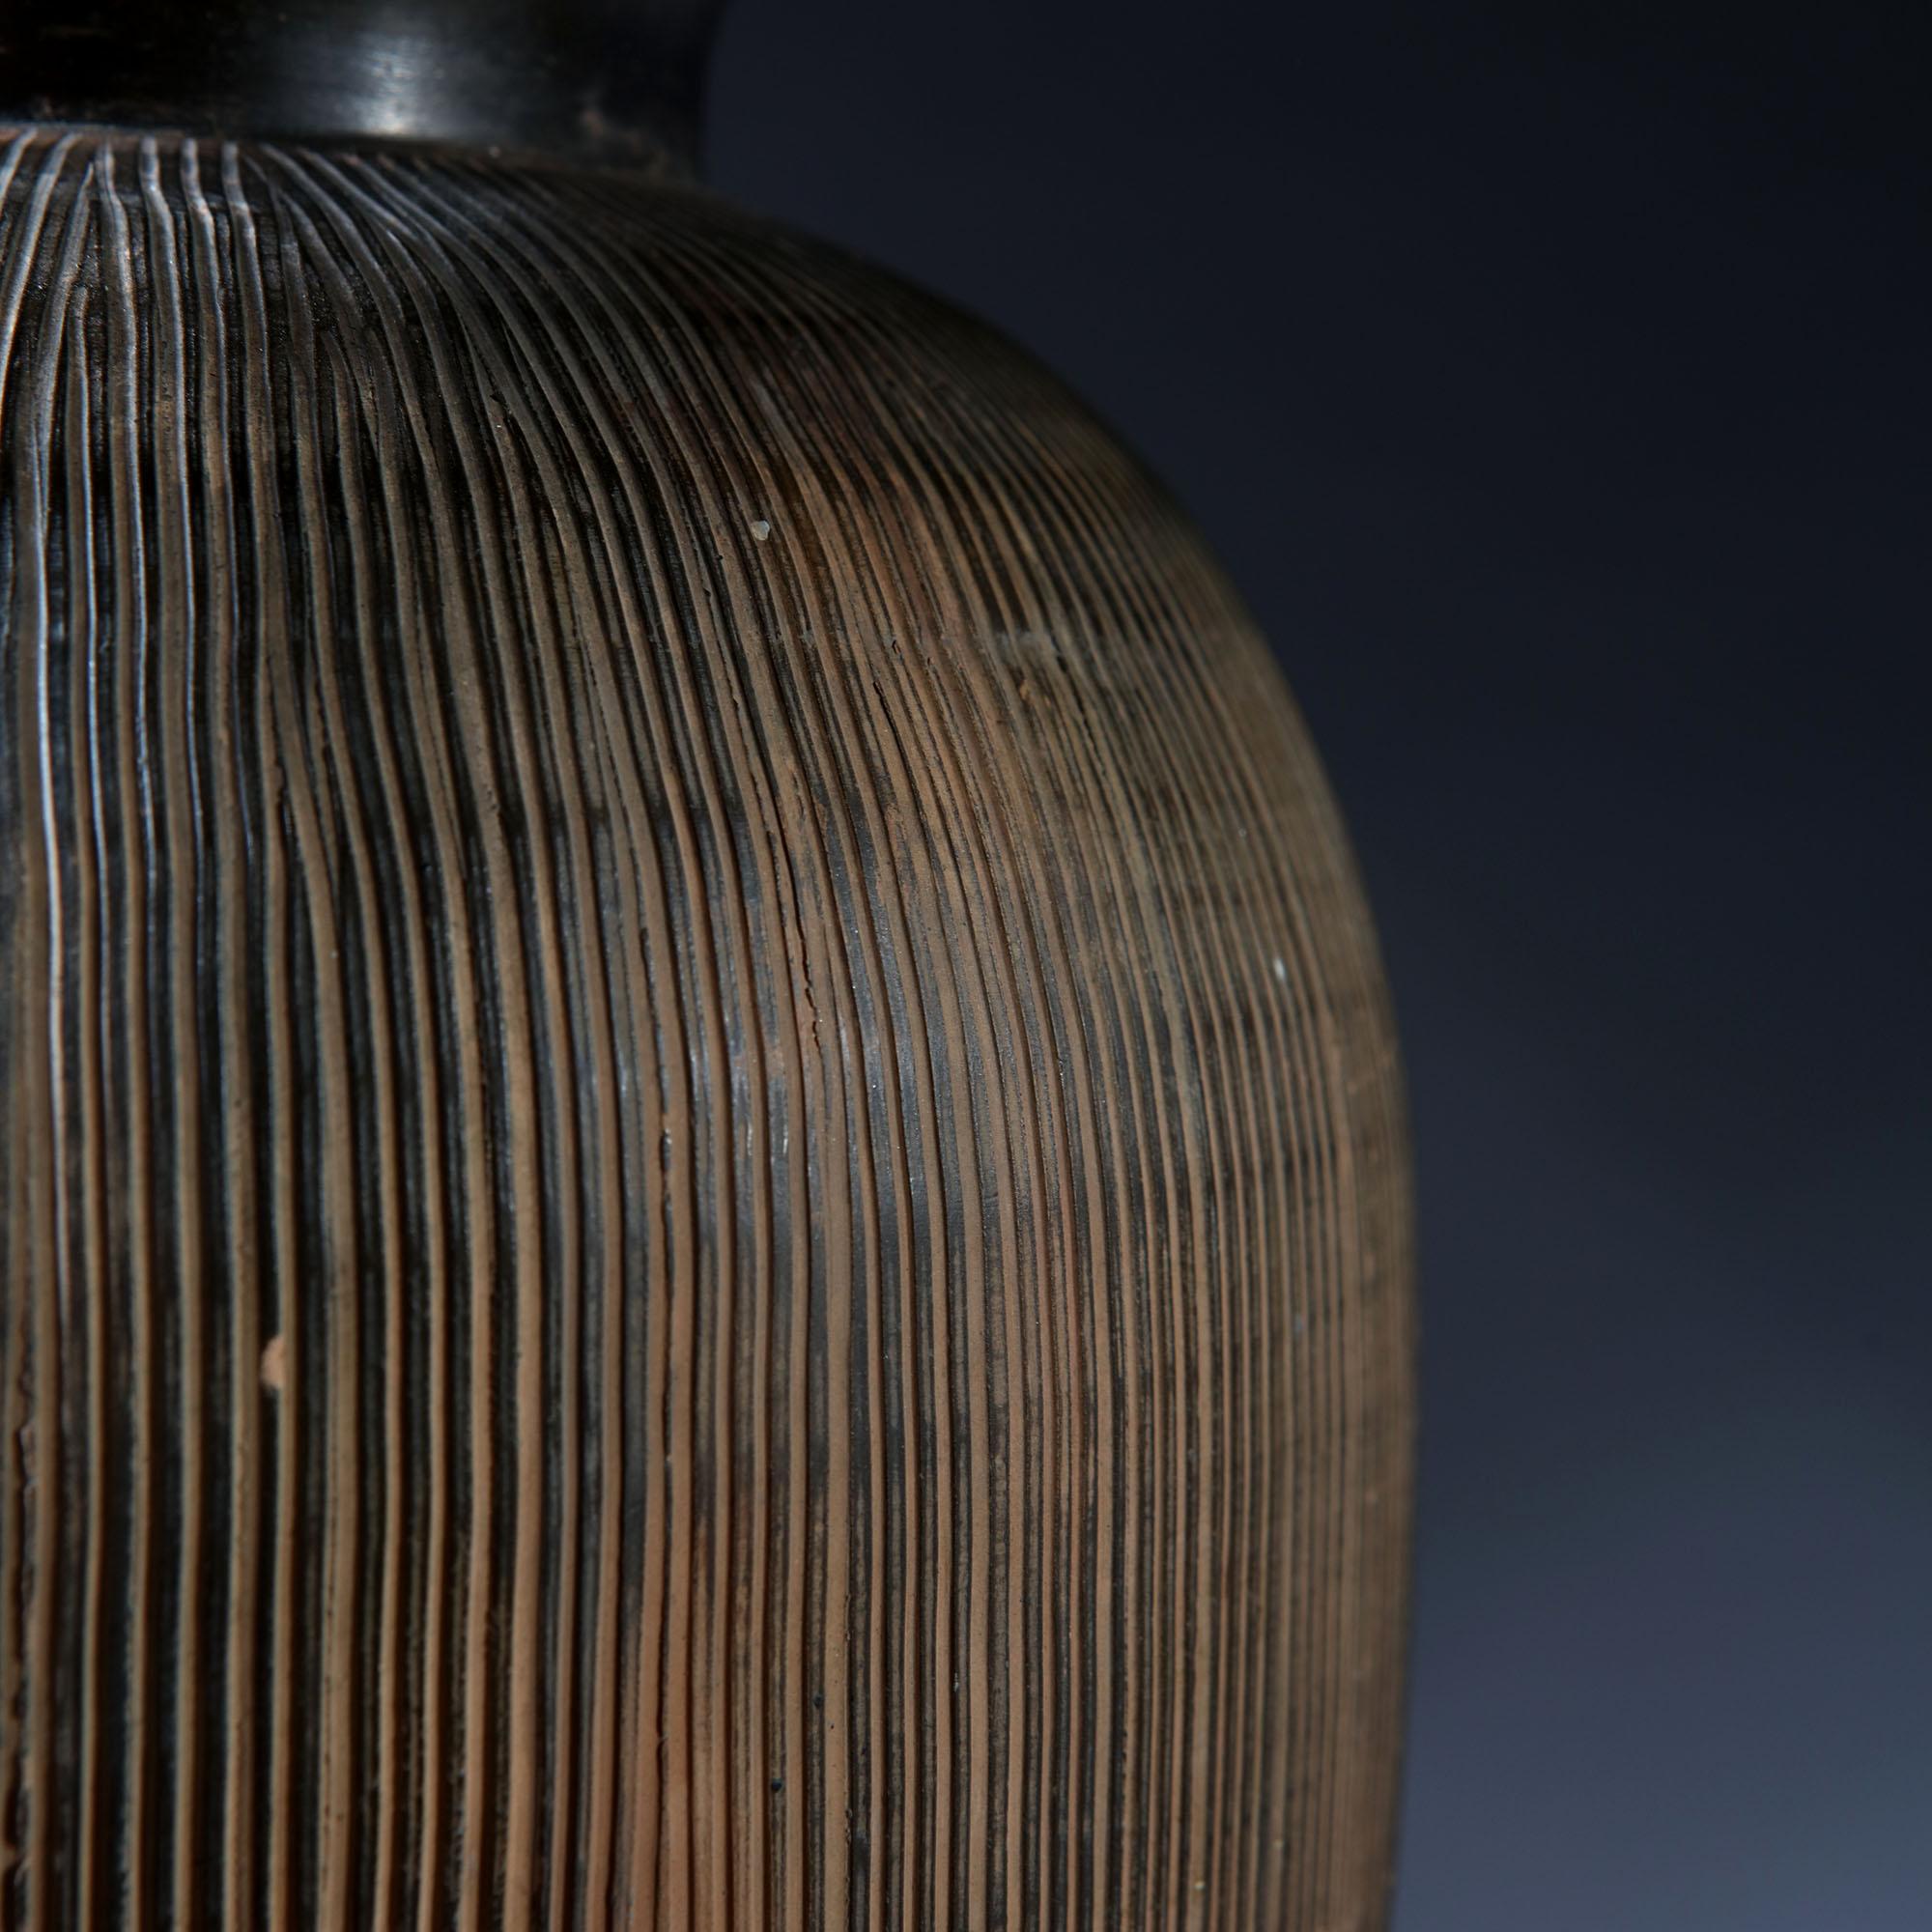 A mid-20th century Japanese ceramic vase, with ribbed rich brown glaze throughout, now converted as a lamp.

Please note: lampshade not included.

Currently wired for the UK.